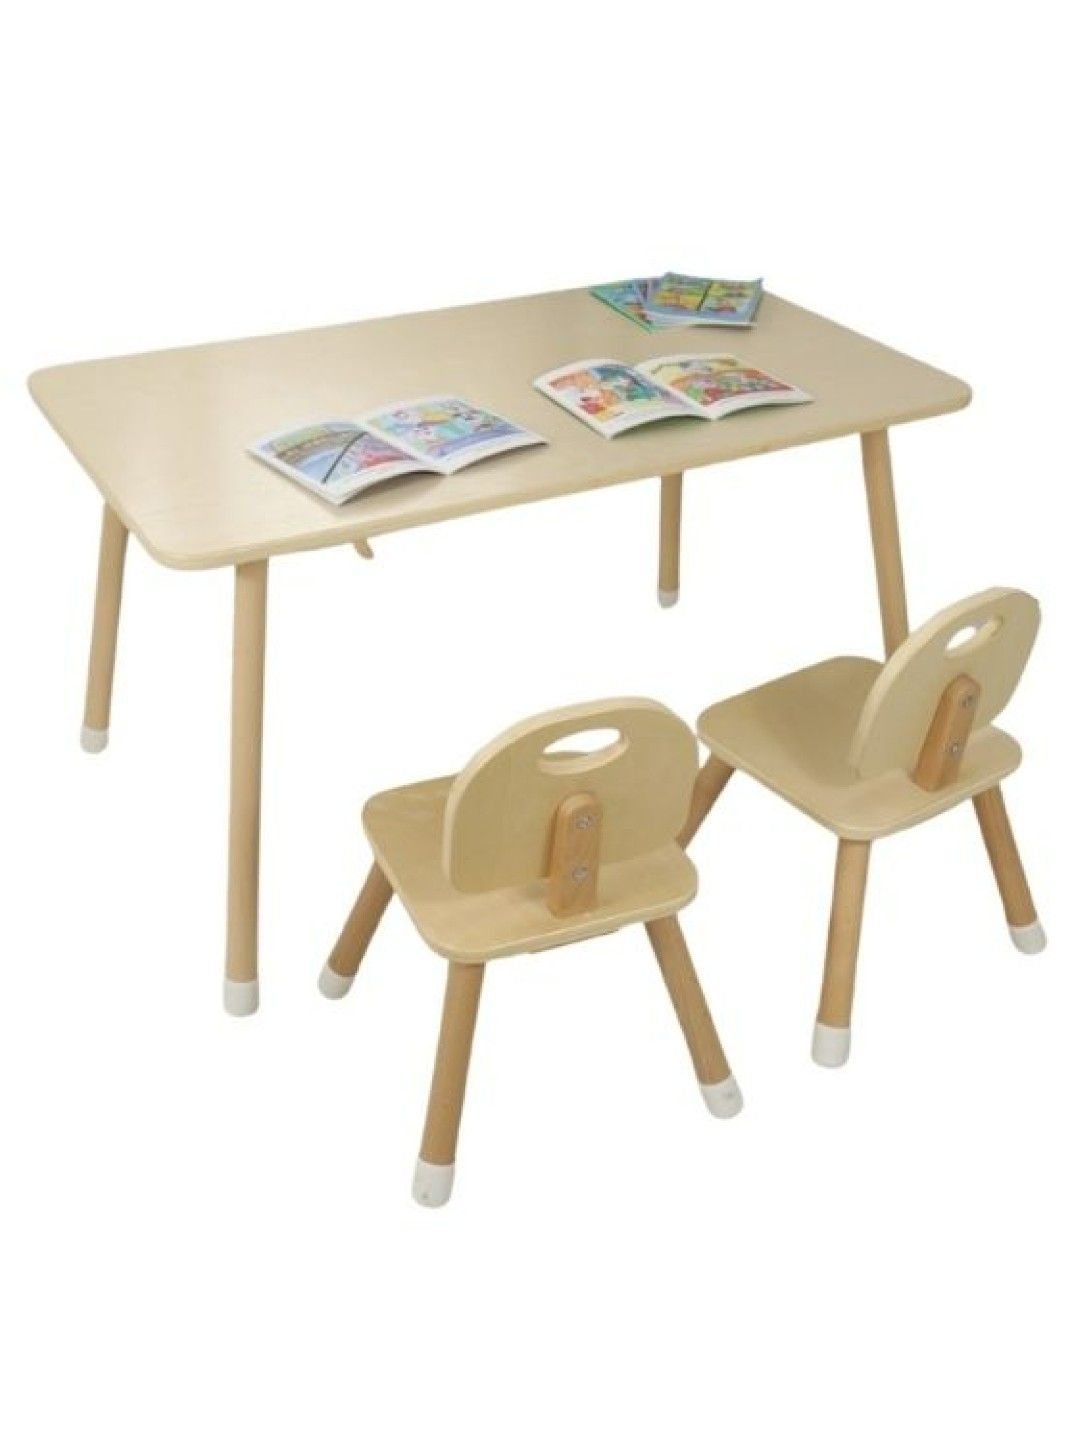 Kiddiestationph Kate Study Table and Chair Set